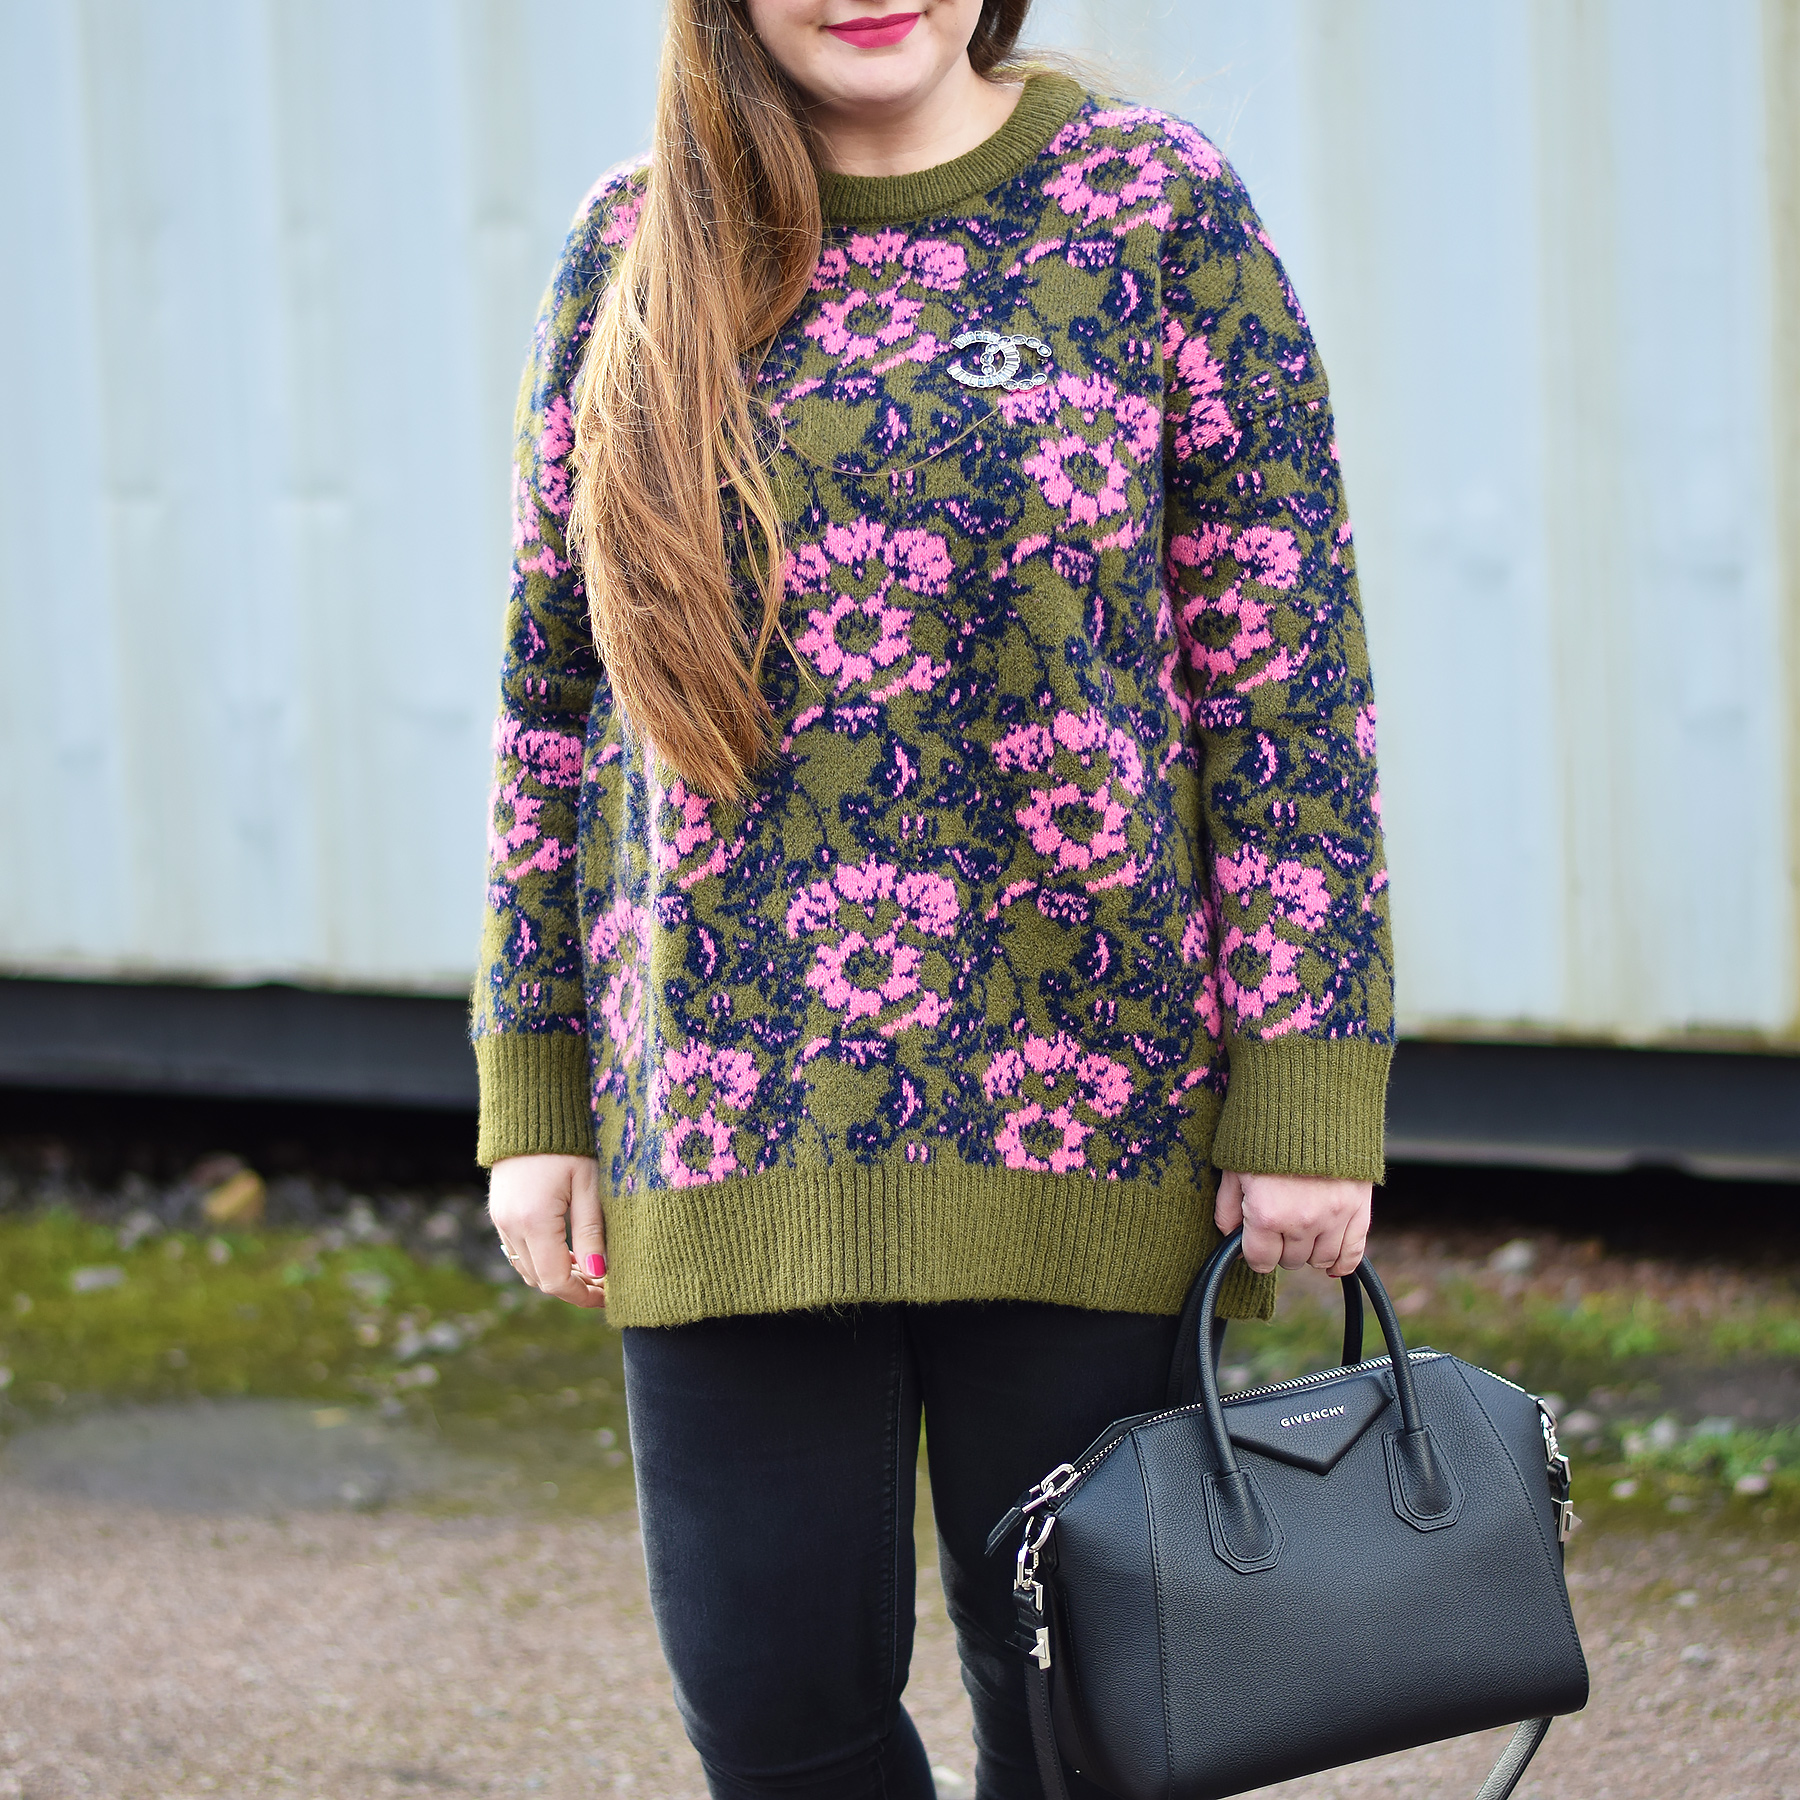 Cozy floral jumper outfit with designer handbag and brooch